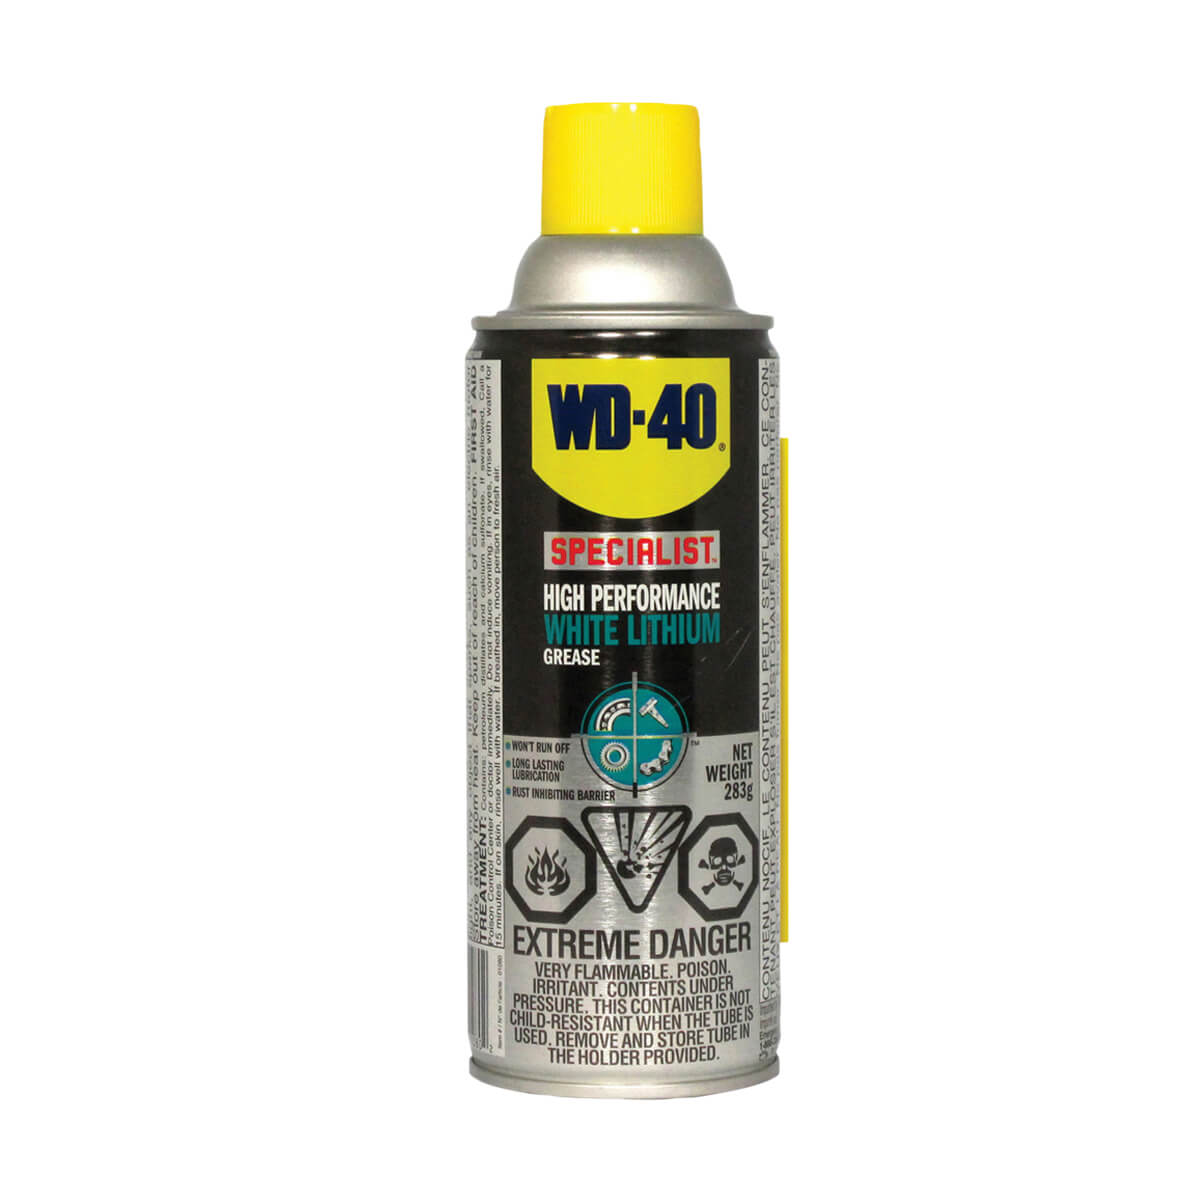 WD-40 Specialist White Lithium Grease - 283 g